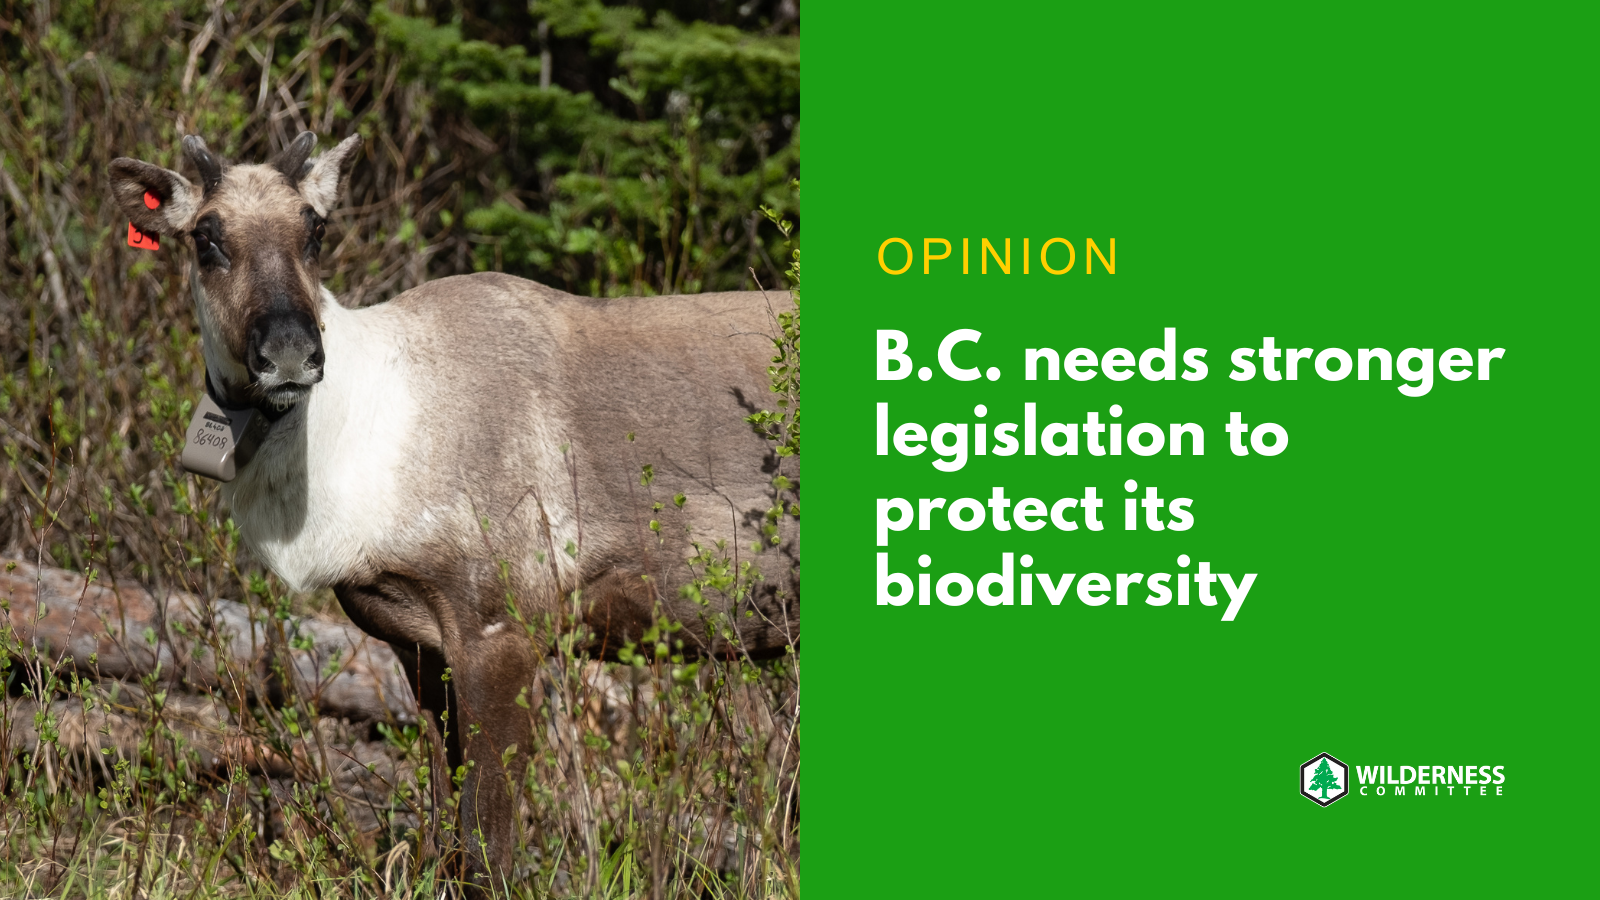 A caribou with a tracking collar on. Text on the image says "opinion: BC needs a strong biodiversity law." End of image description. 